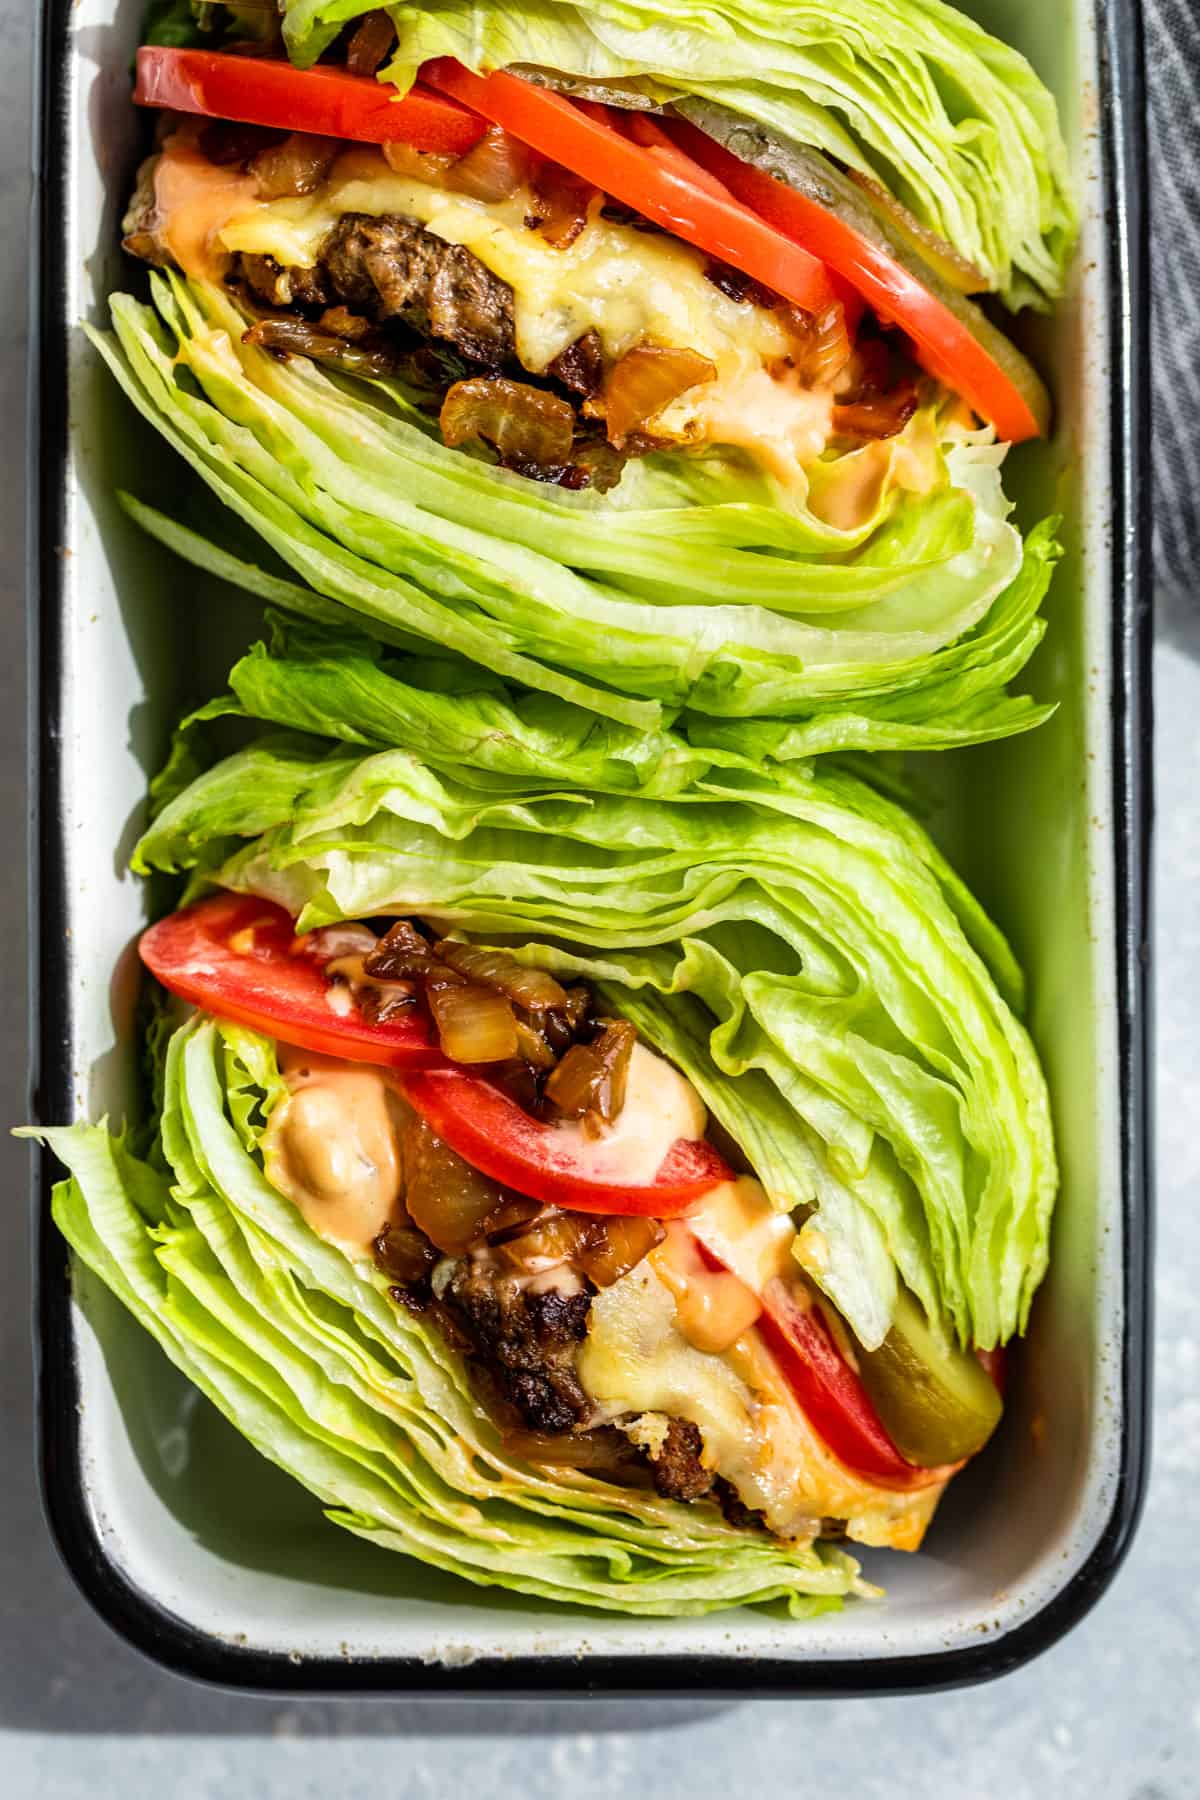 Straight down view of 2 In and Out Burger Lettuce wraps in a black rimmed white enameled container.